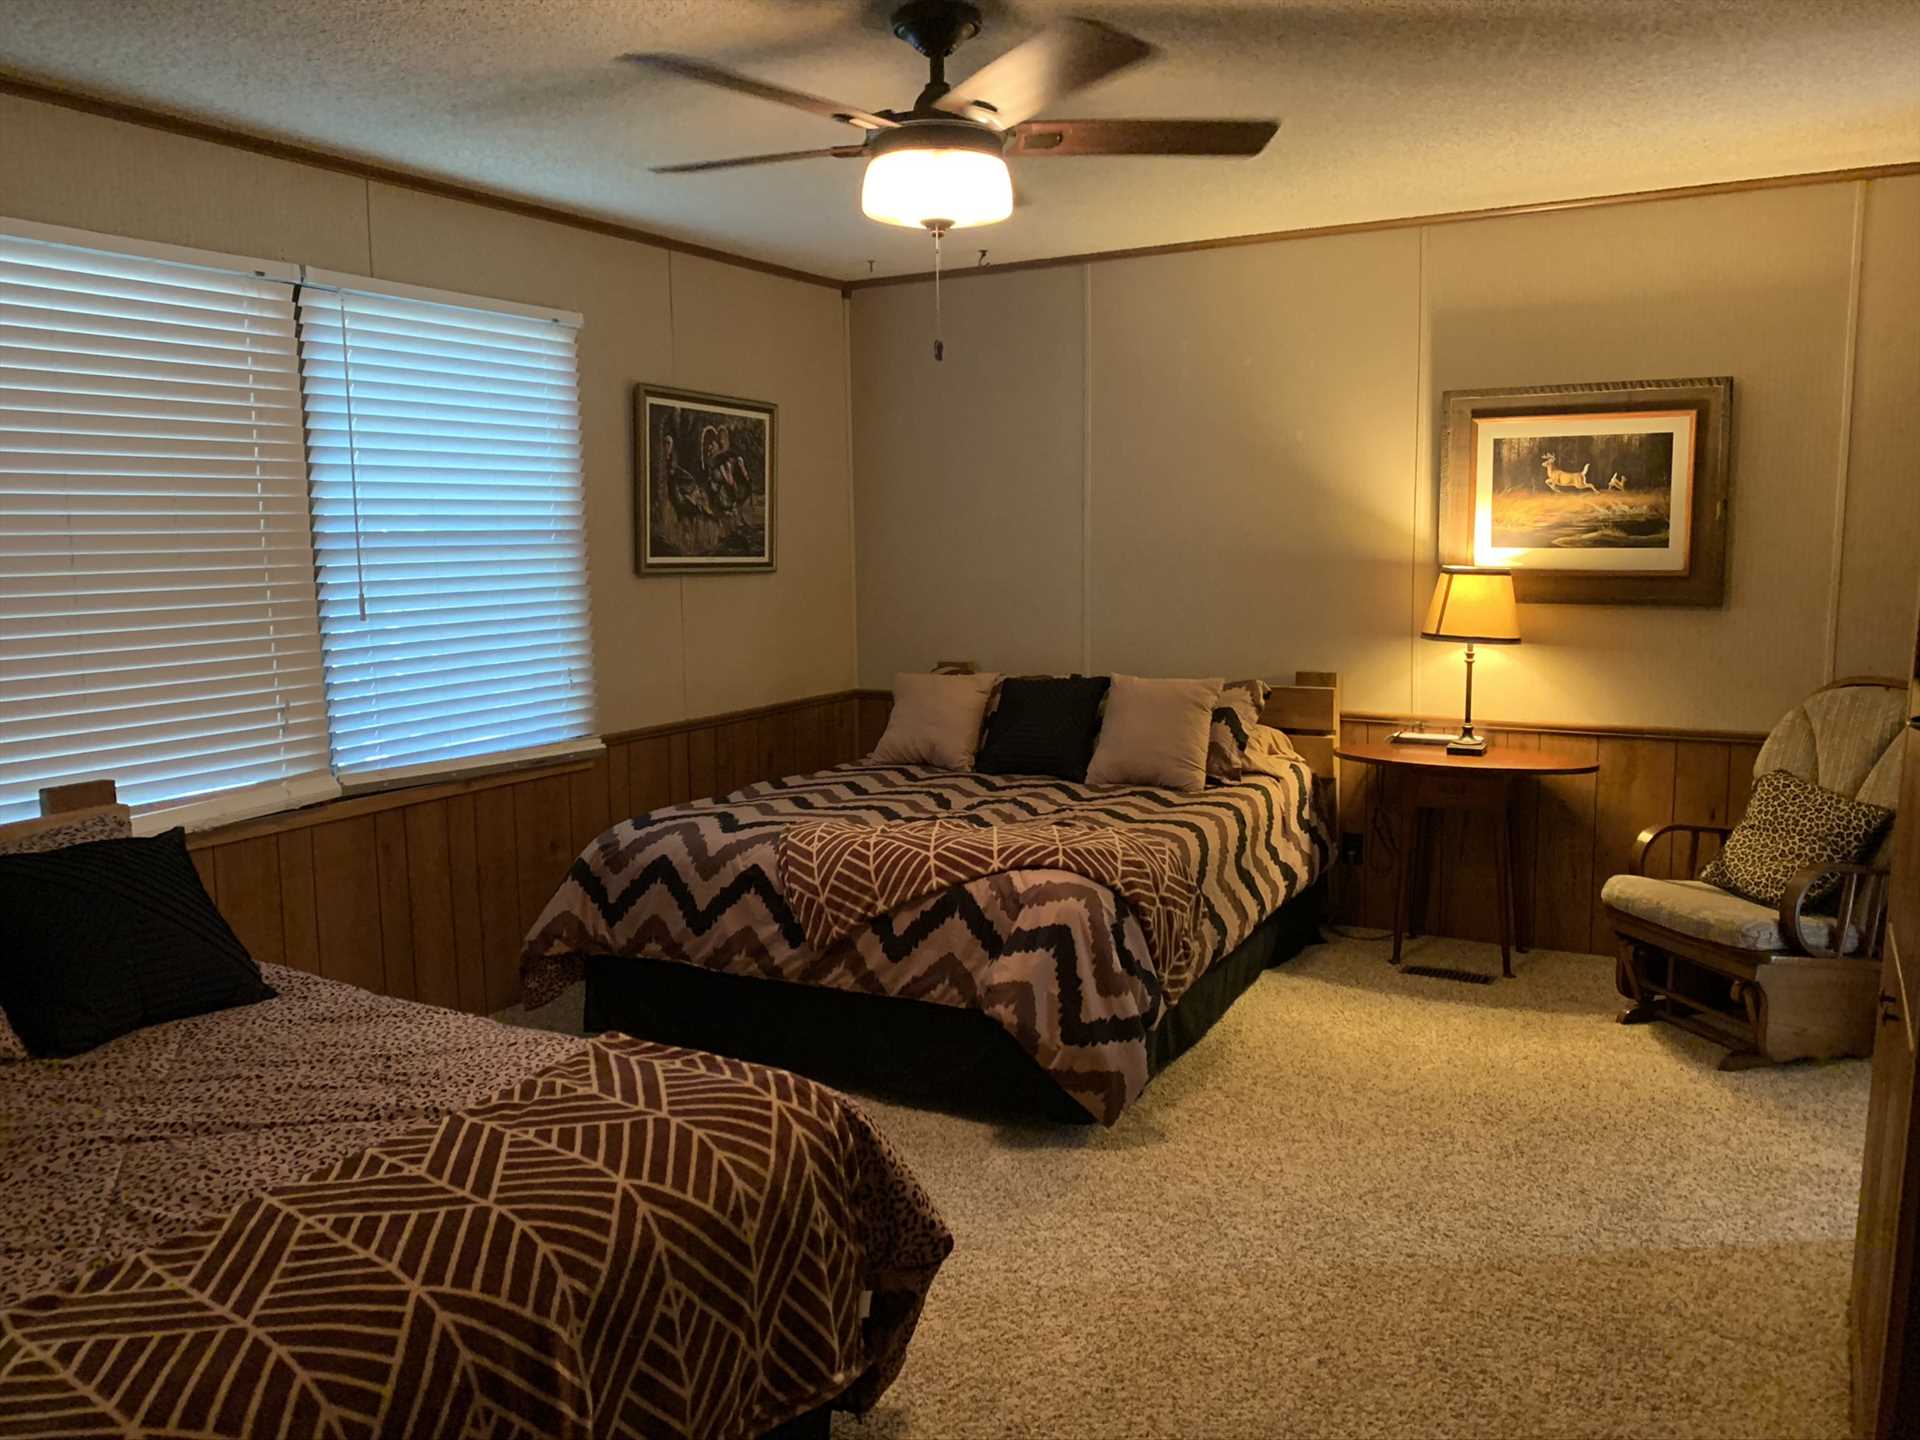                                                 Natural lighting fills the master bedroom with a warm glow, and two queen-sized beds provide restful sleep for four guests. Bed and bath linens are also provided throughout the Lodge.